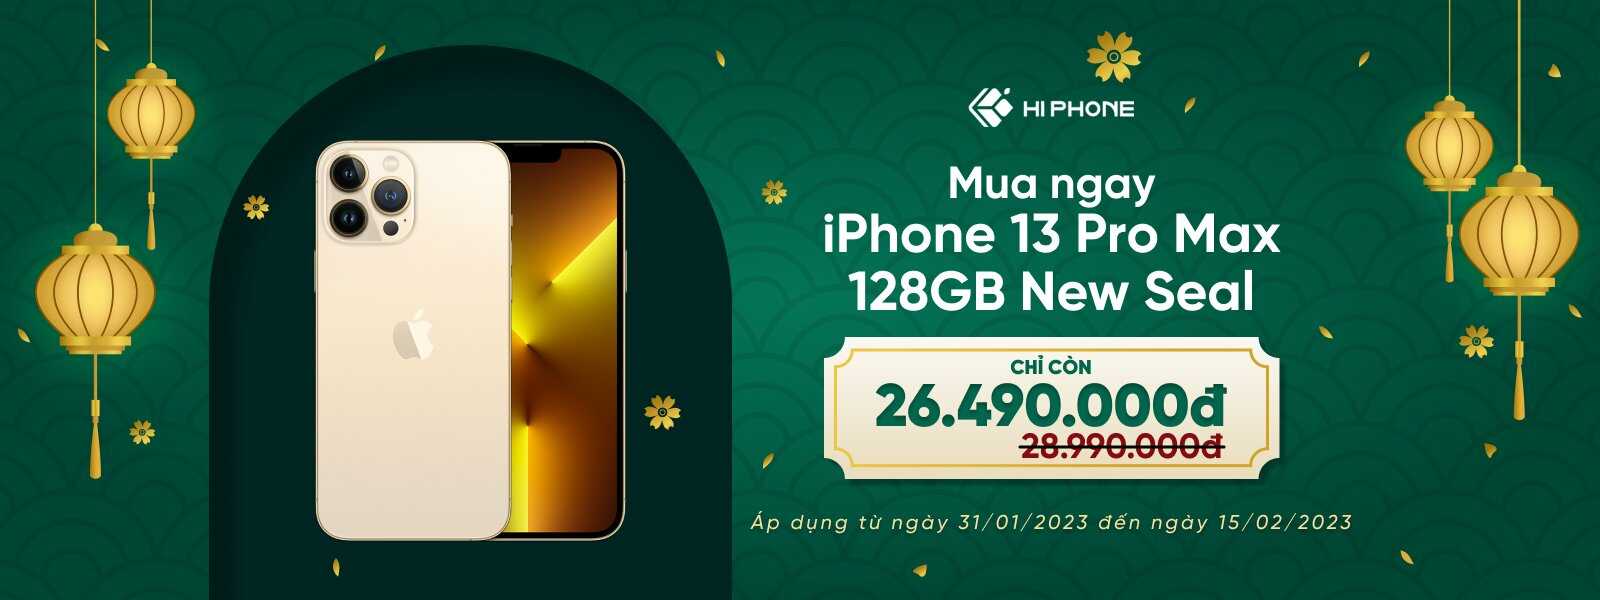 iphone 13 pro max 128gb new seal vn/a